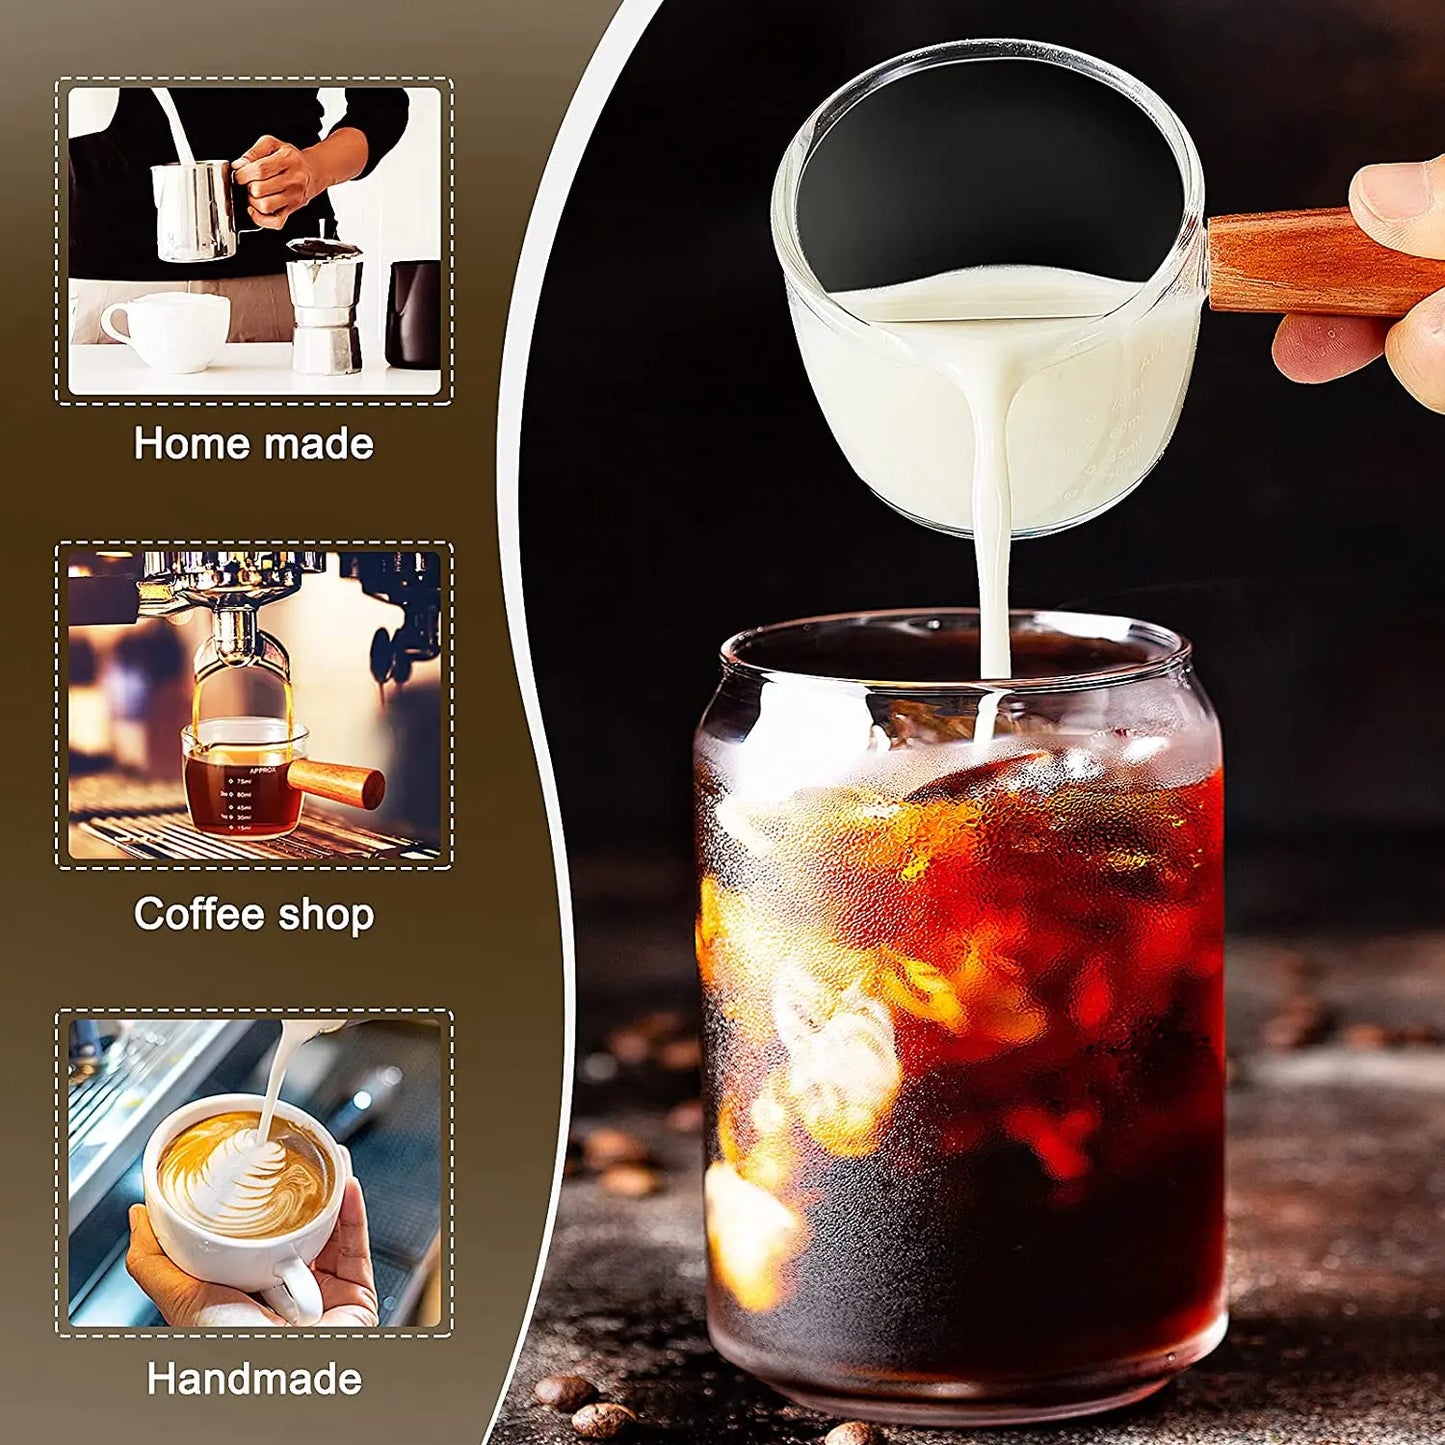 50/75/100/140ml Glass Espresso Measuring Cup With Wooden Handle Double/Single Mouth Milk Jug Kitchen Sauce Dish Home Coffee Ware